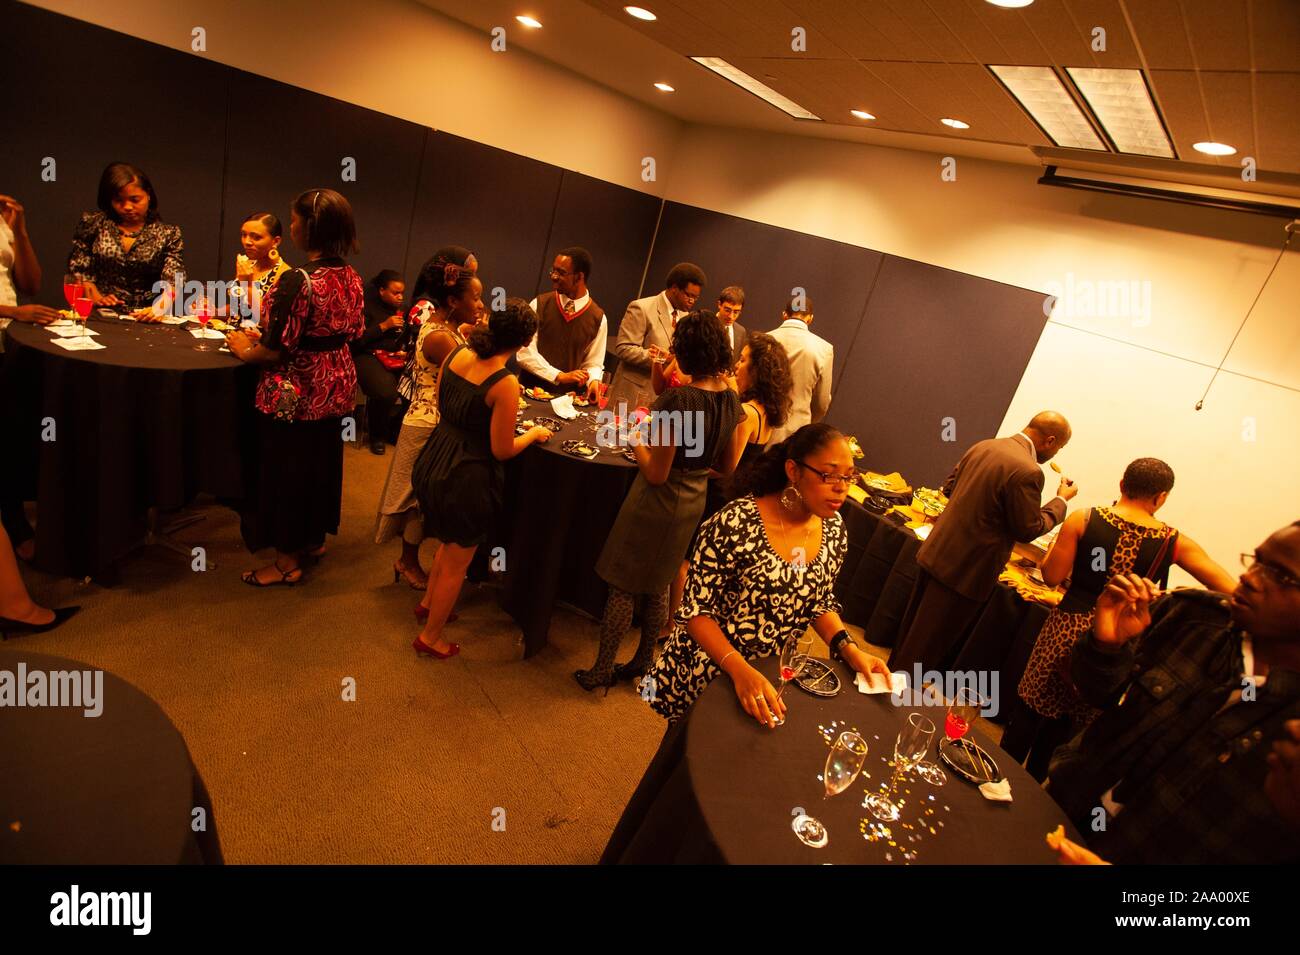 Guests gather at tables and converse during a Black History Month event at the Johns Hopkins University in Baltimore, Maryland, January 31, 2009. From the Homewood Photography collection. () Stock Photo